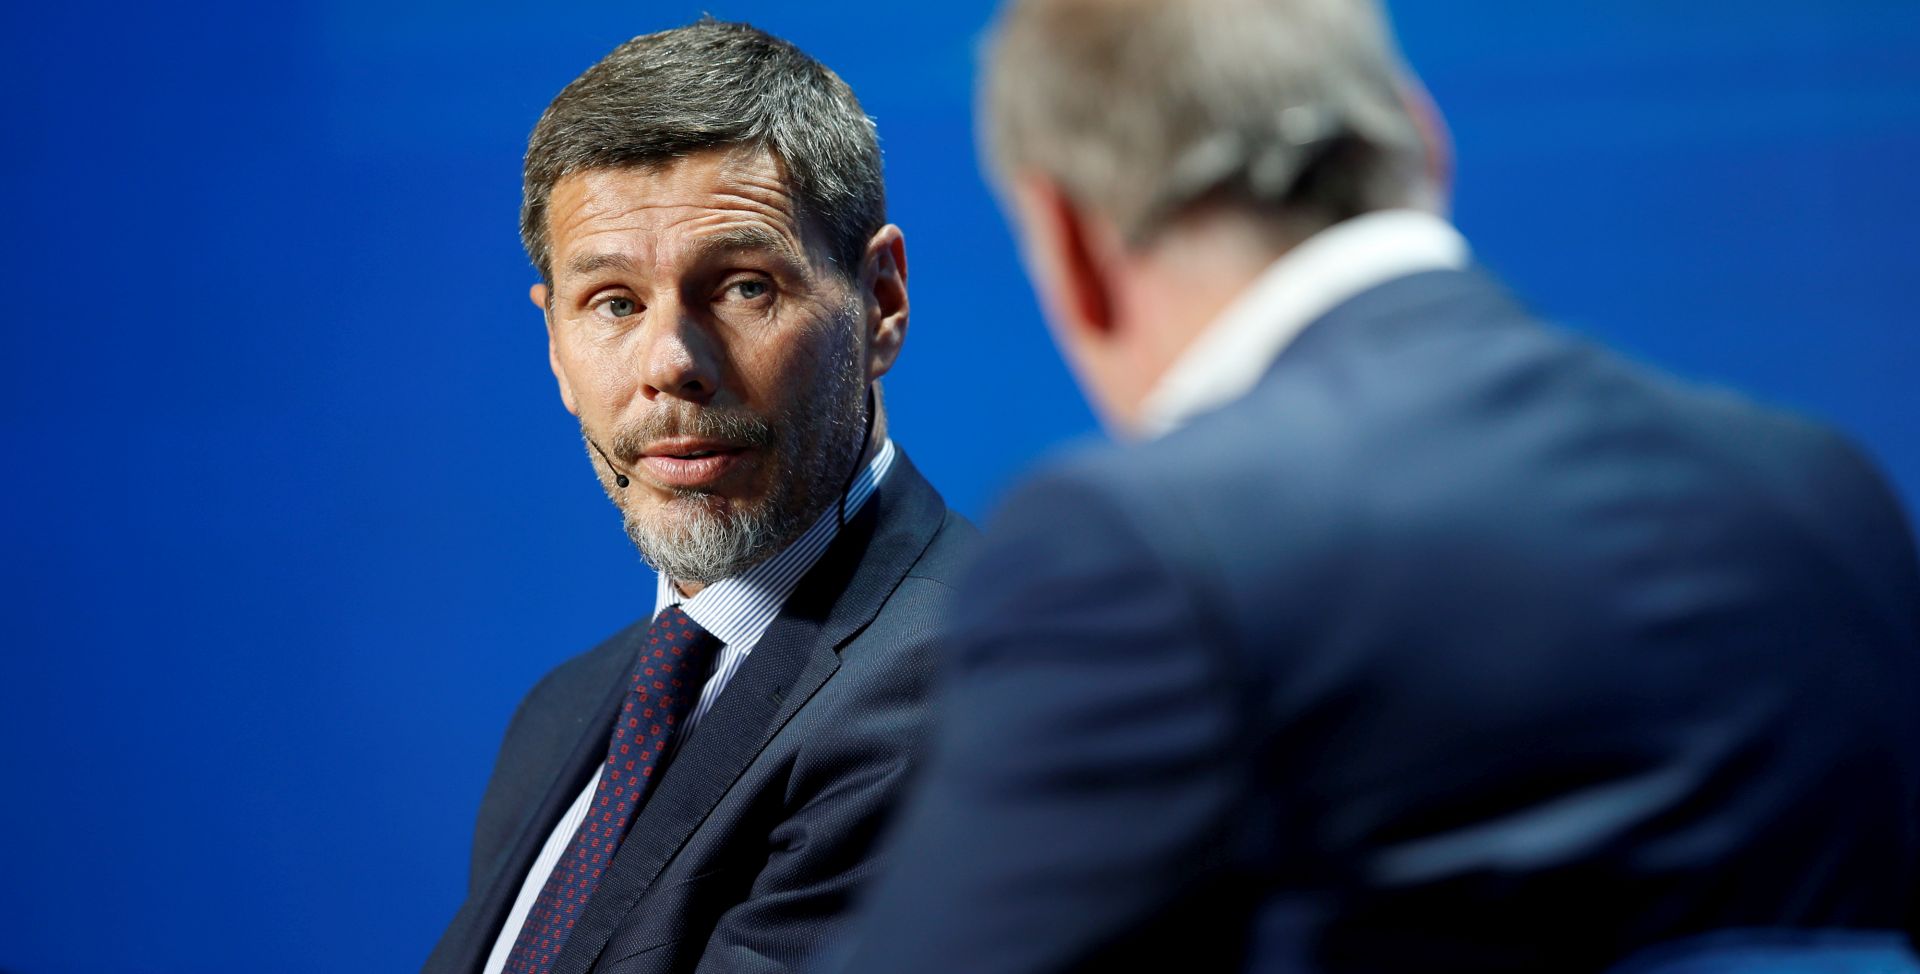 epa07257895 Former Croatian Football player and current Deputy Secretary General of FIFA Zvonimir Boban (L) speaks during the first day of the 13th edition of Dubai International Sports Conference in the Gulf emirate of Dubai, United Arab Emirates, 02 January 2019.  EPA/ALI HAIDER